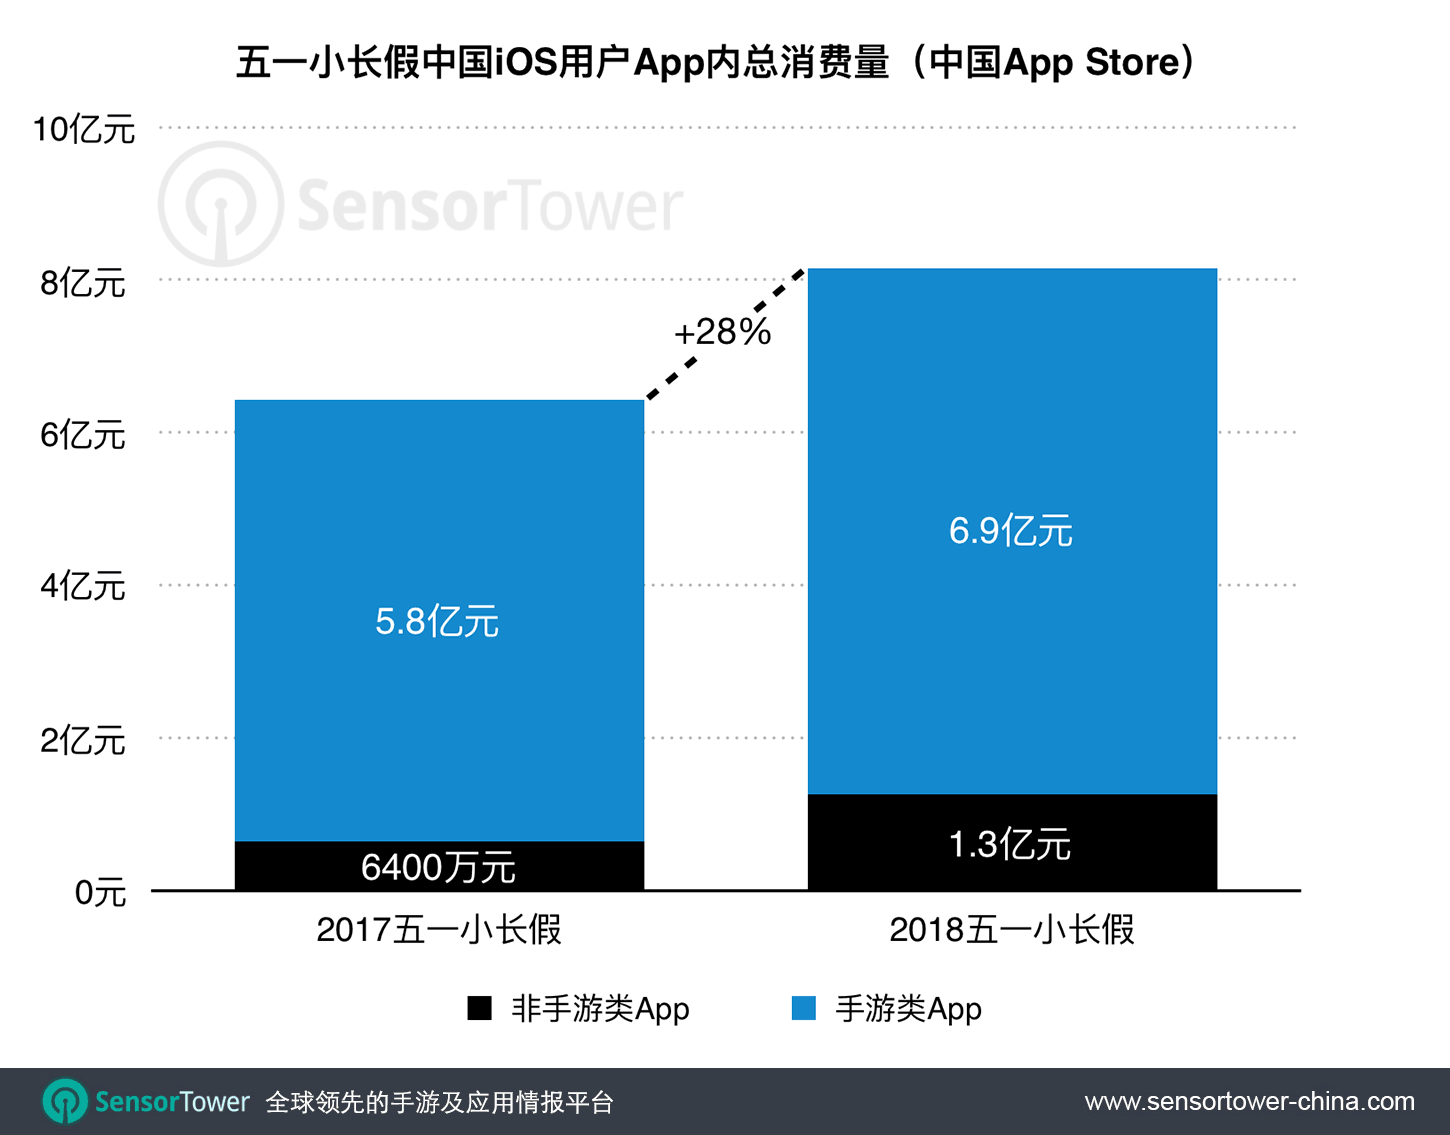 2018 Chinese Labor Day Holiday App Store Revenue YoY Growth